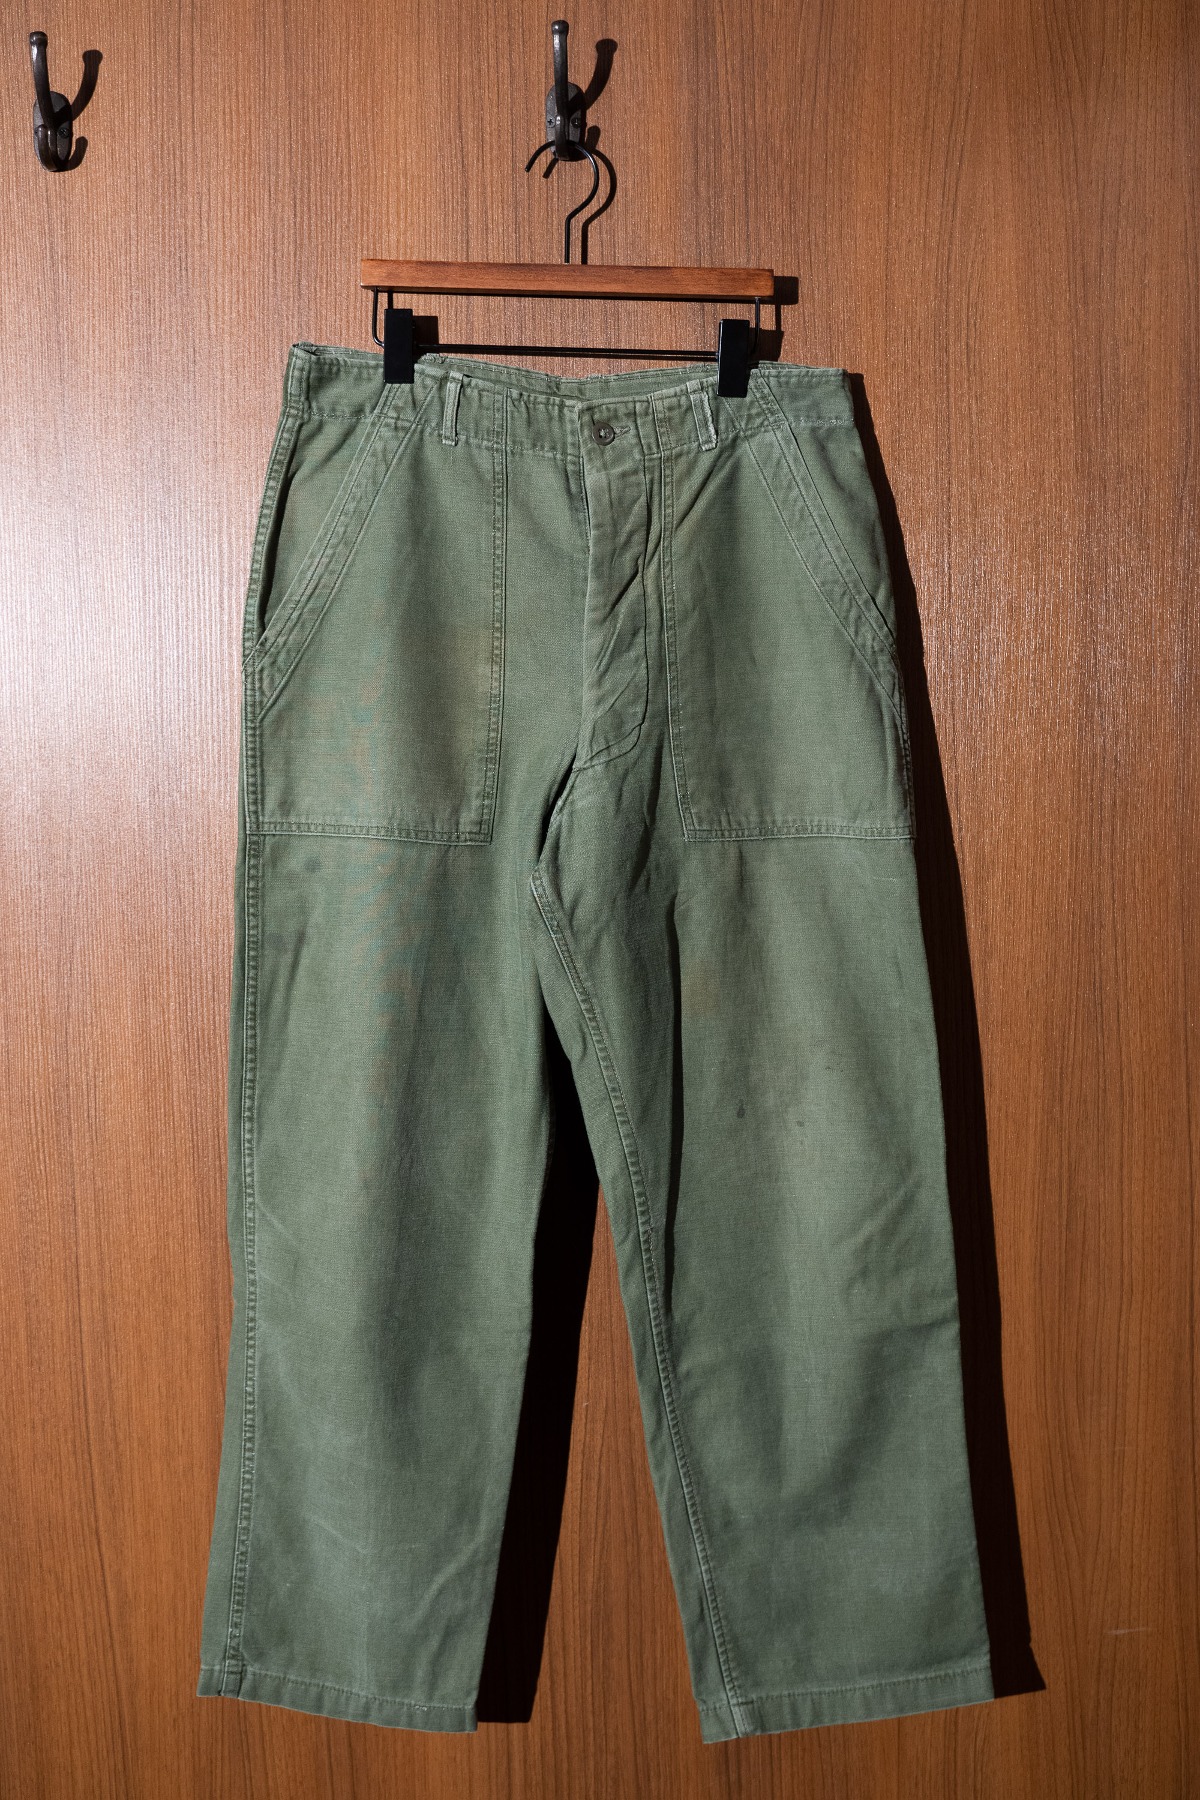 U.S. ARMY &#039;FATIGUE PANTS&#039; (size : unknown)